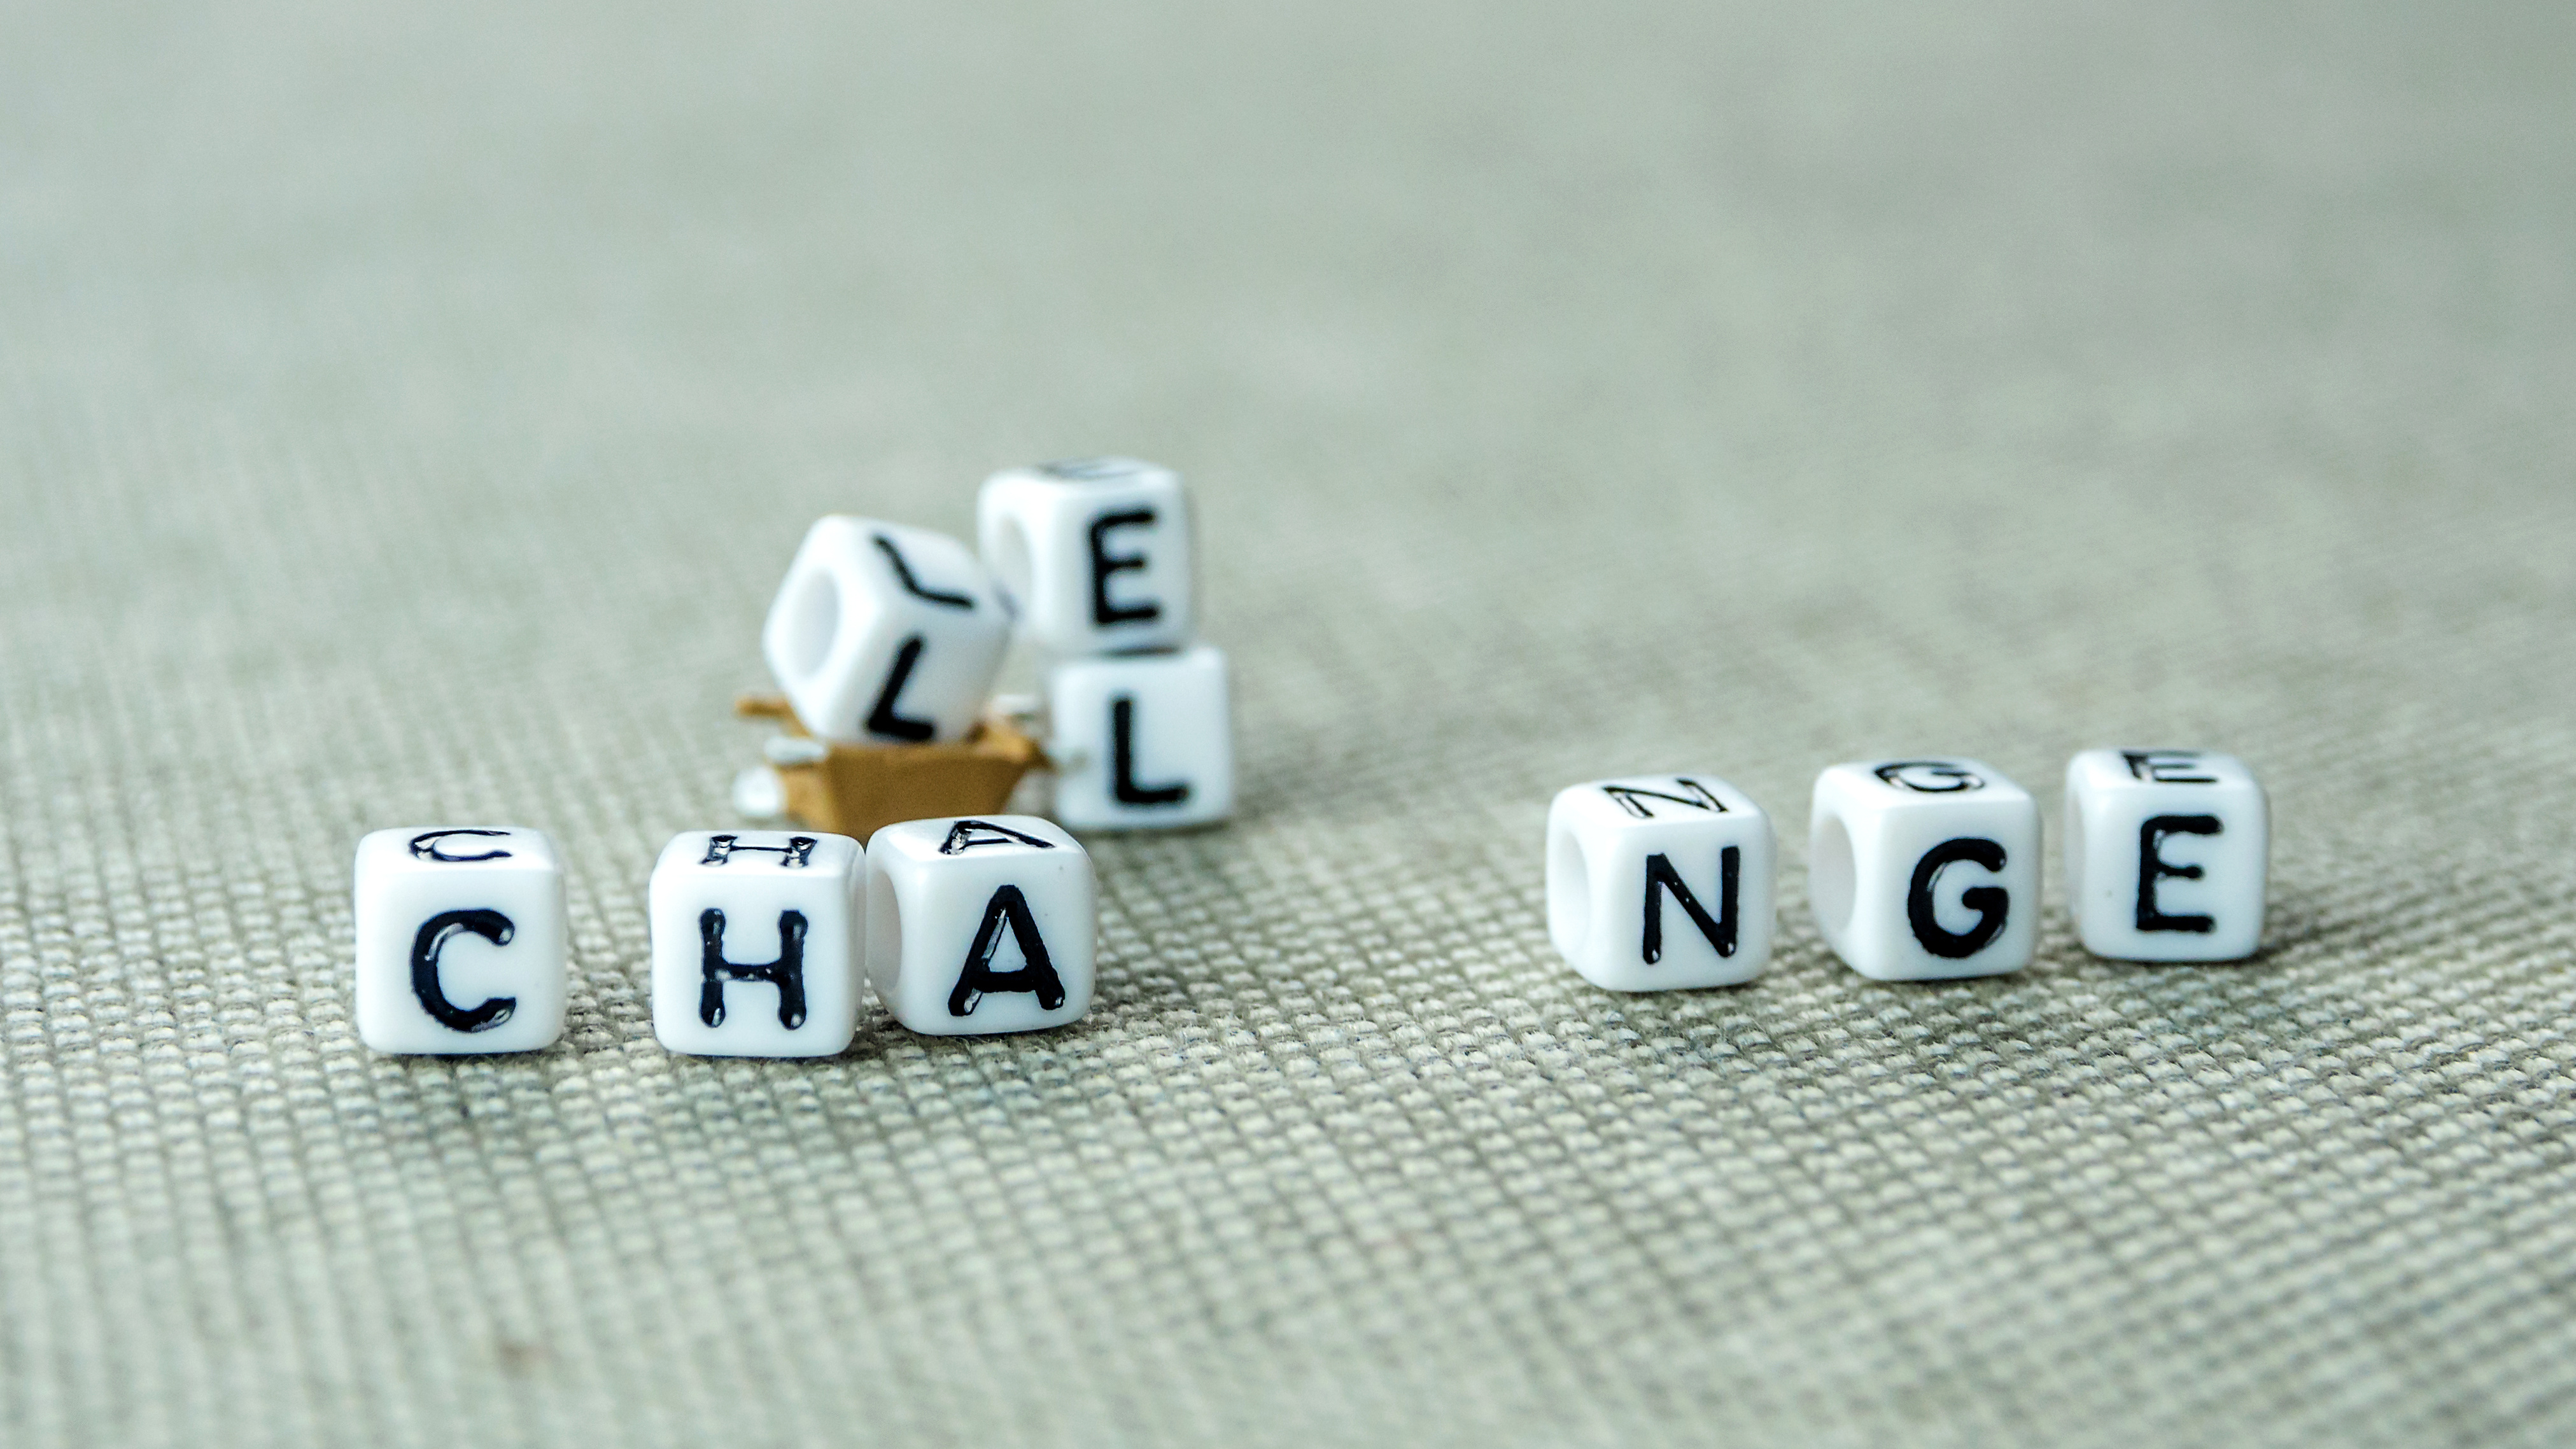 White Cubes With Word Challenge Creating New Word Change, Personal Development And Career Growth Or Challenge Yourself Concept, Grey Background With Miniature Figurines Watching At It